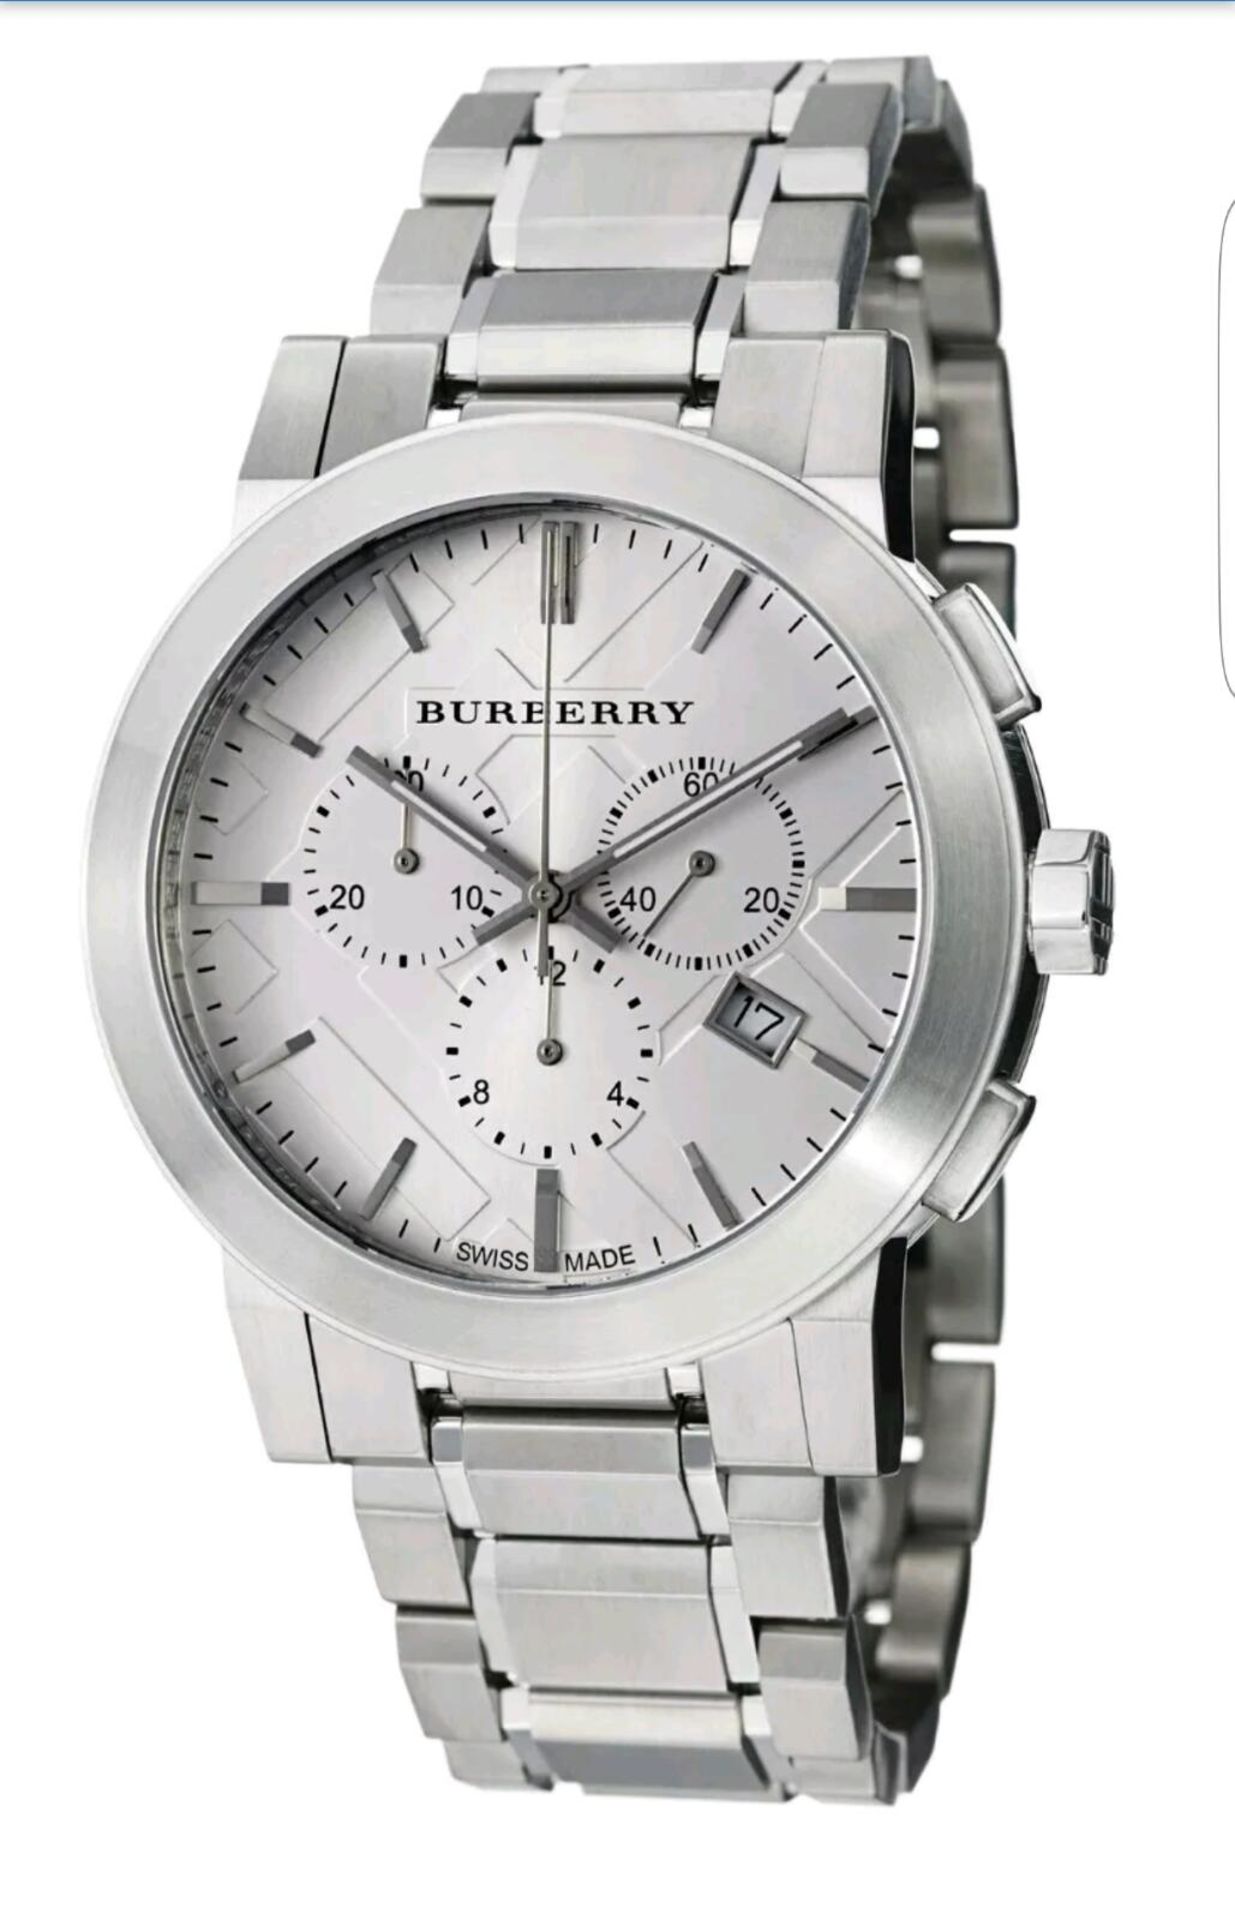 BRAND NEW GENTS BURBERRY DESIGNER WATCH BU9350, COMPLETE WITH ORIGINAL BOX AND MANUAL - RRP £499